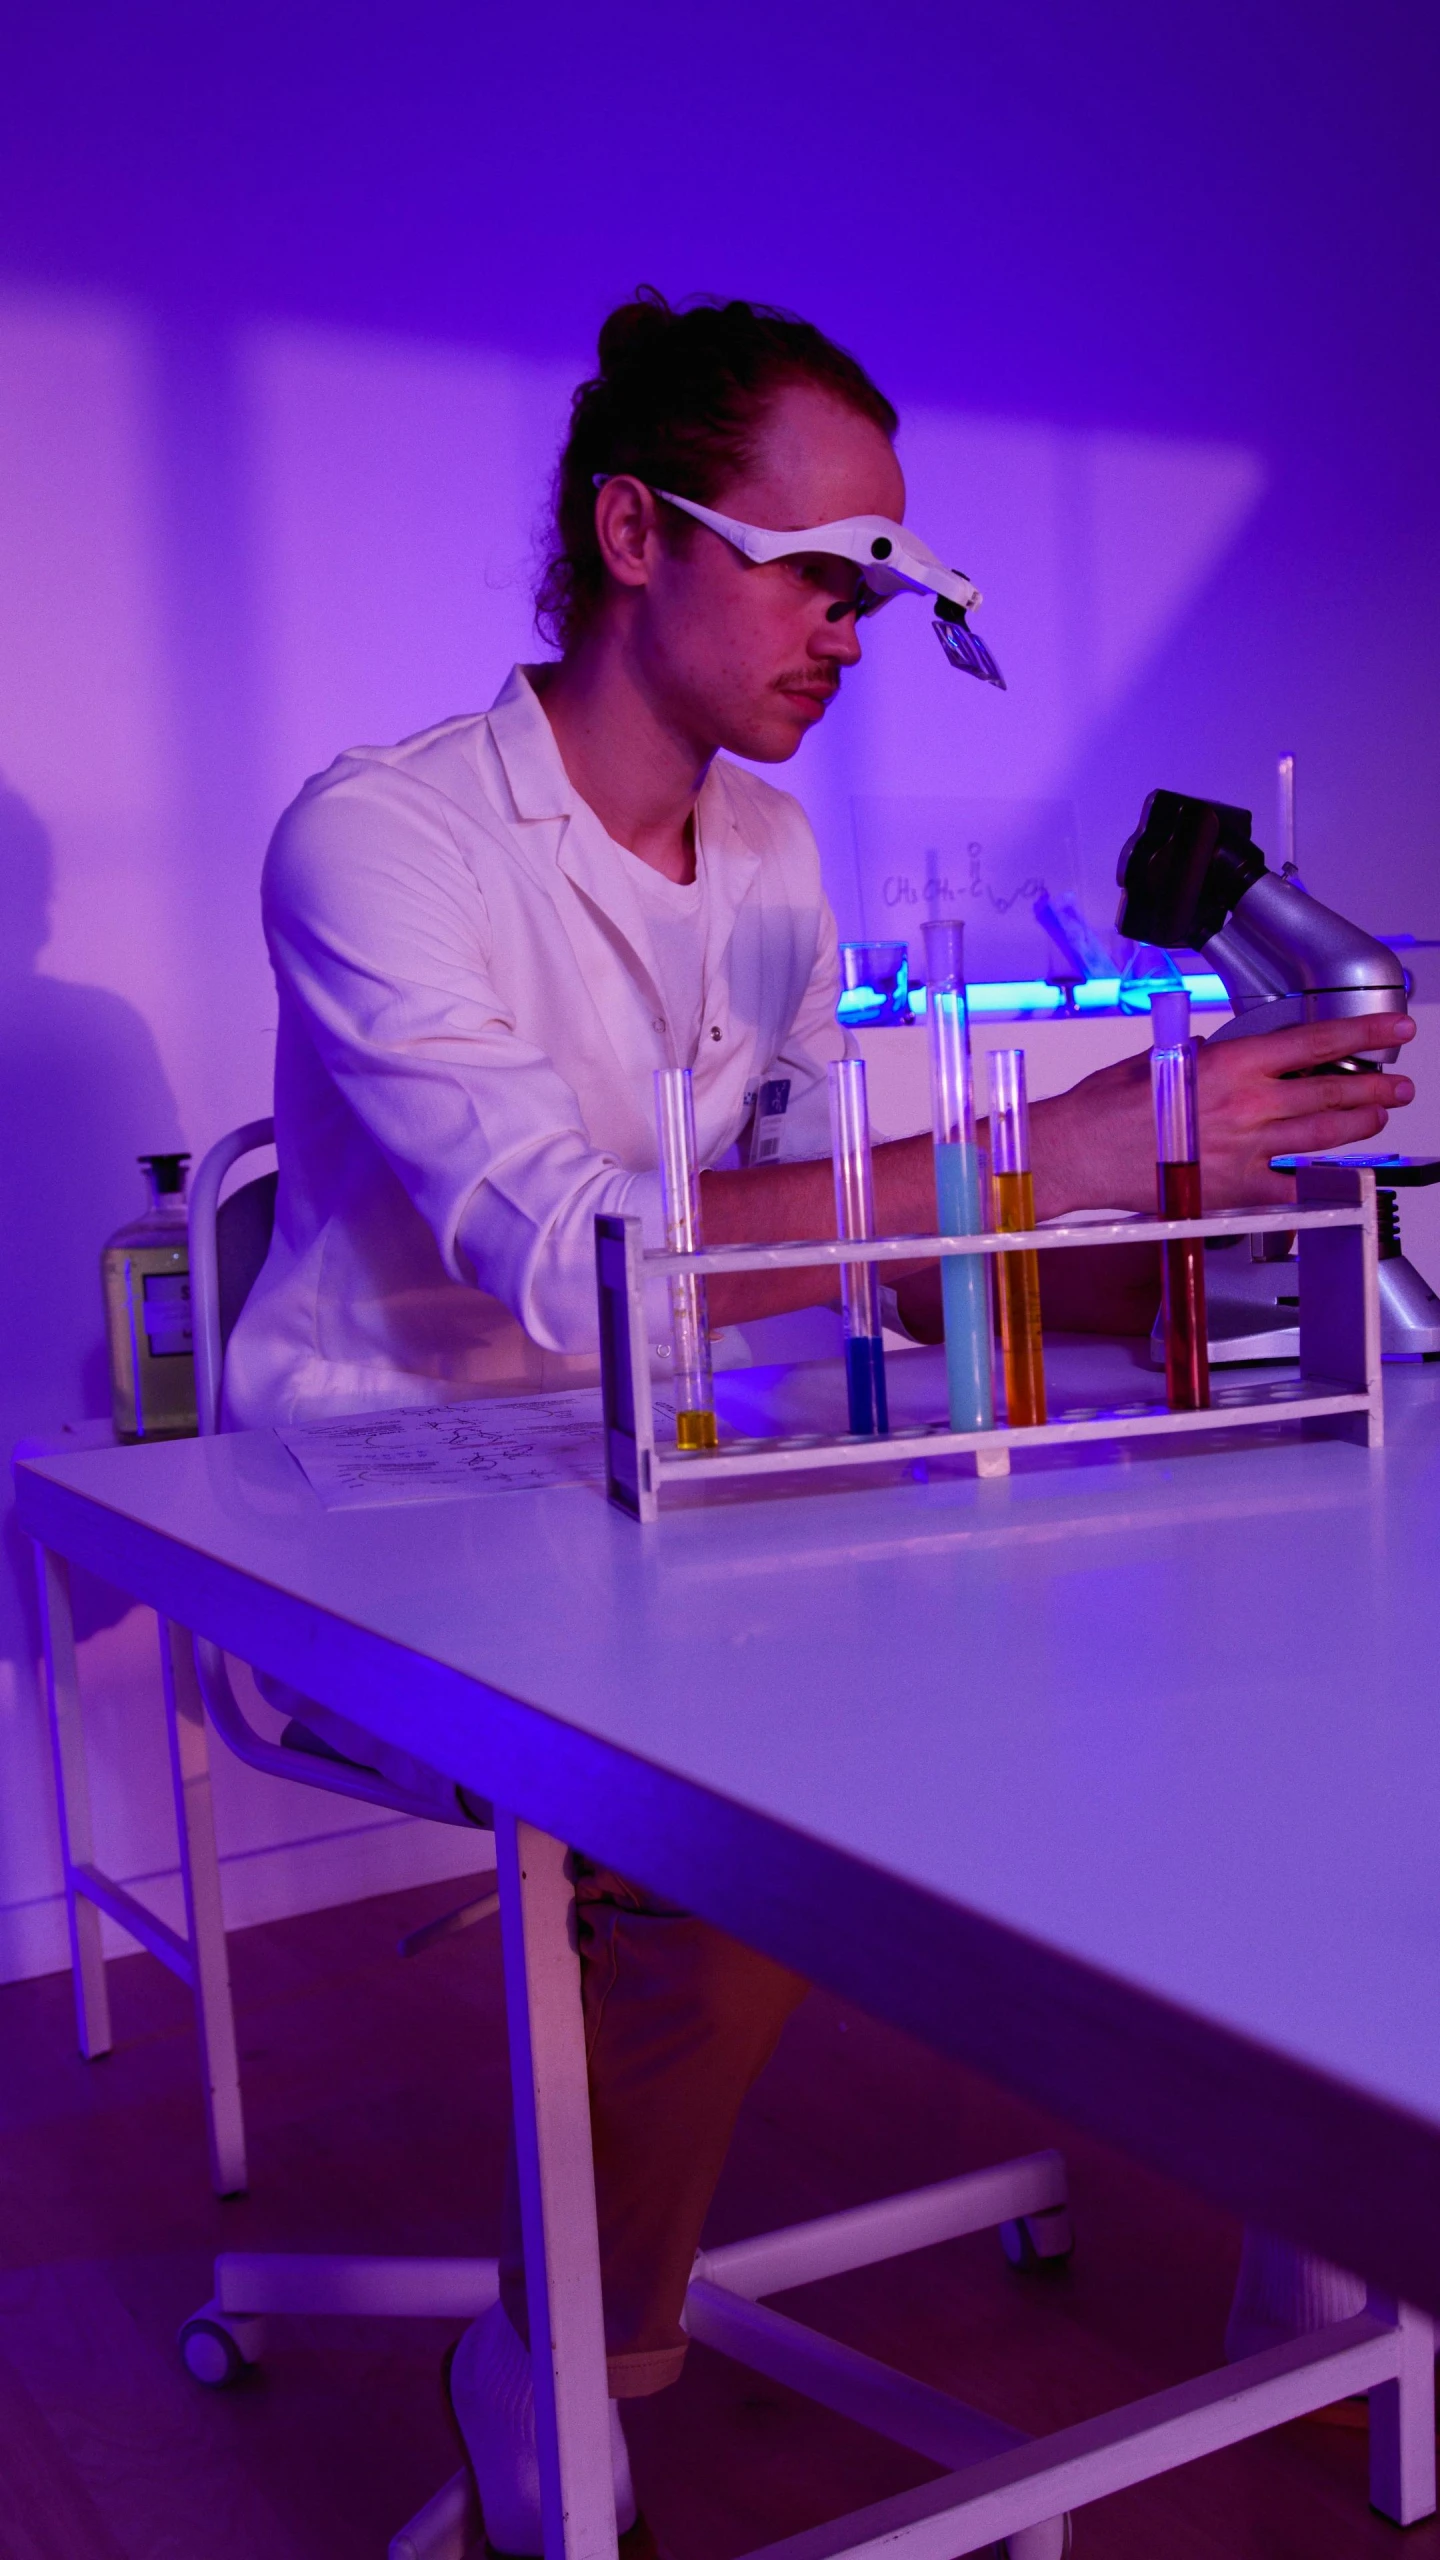 a man sitting at a table in front of a microscope, purple volumetric lighting, chemical woekshop, performance, low quality photo